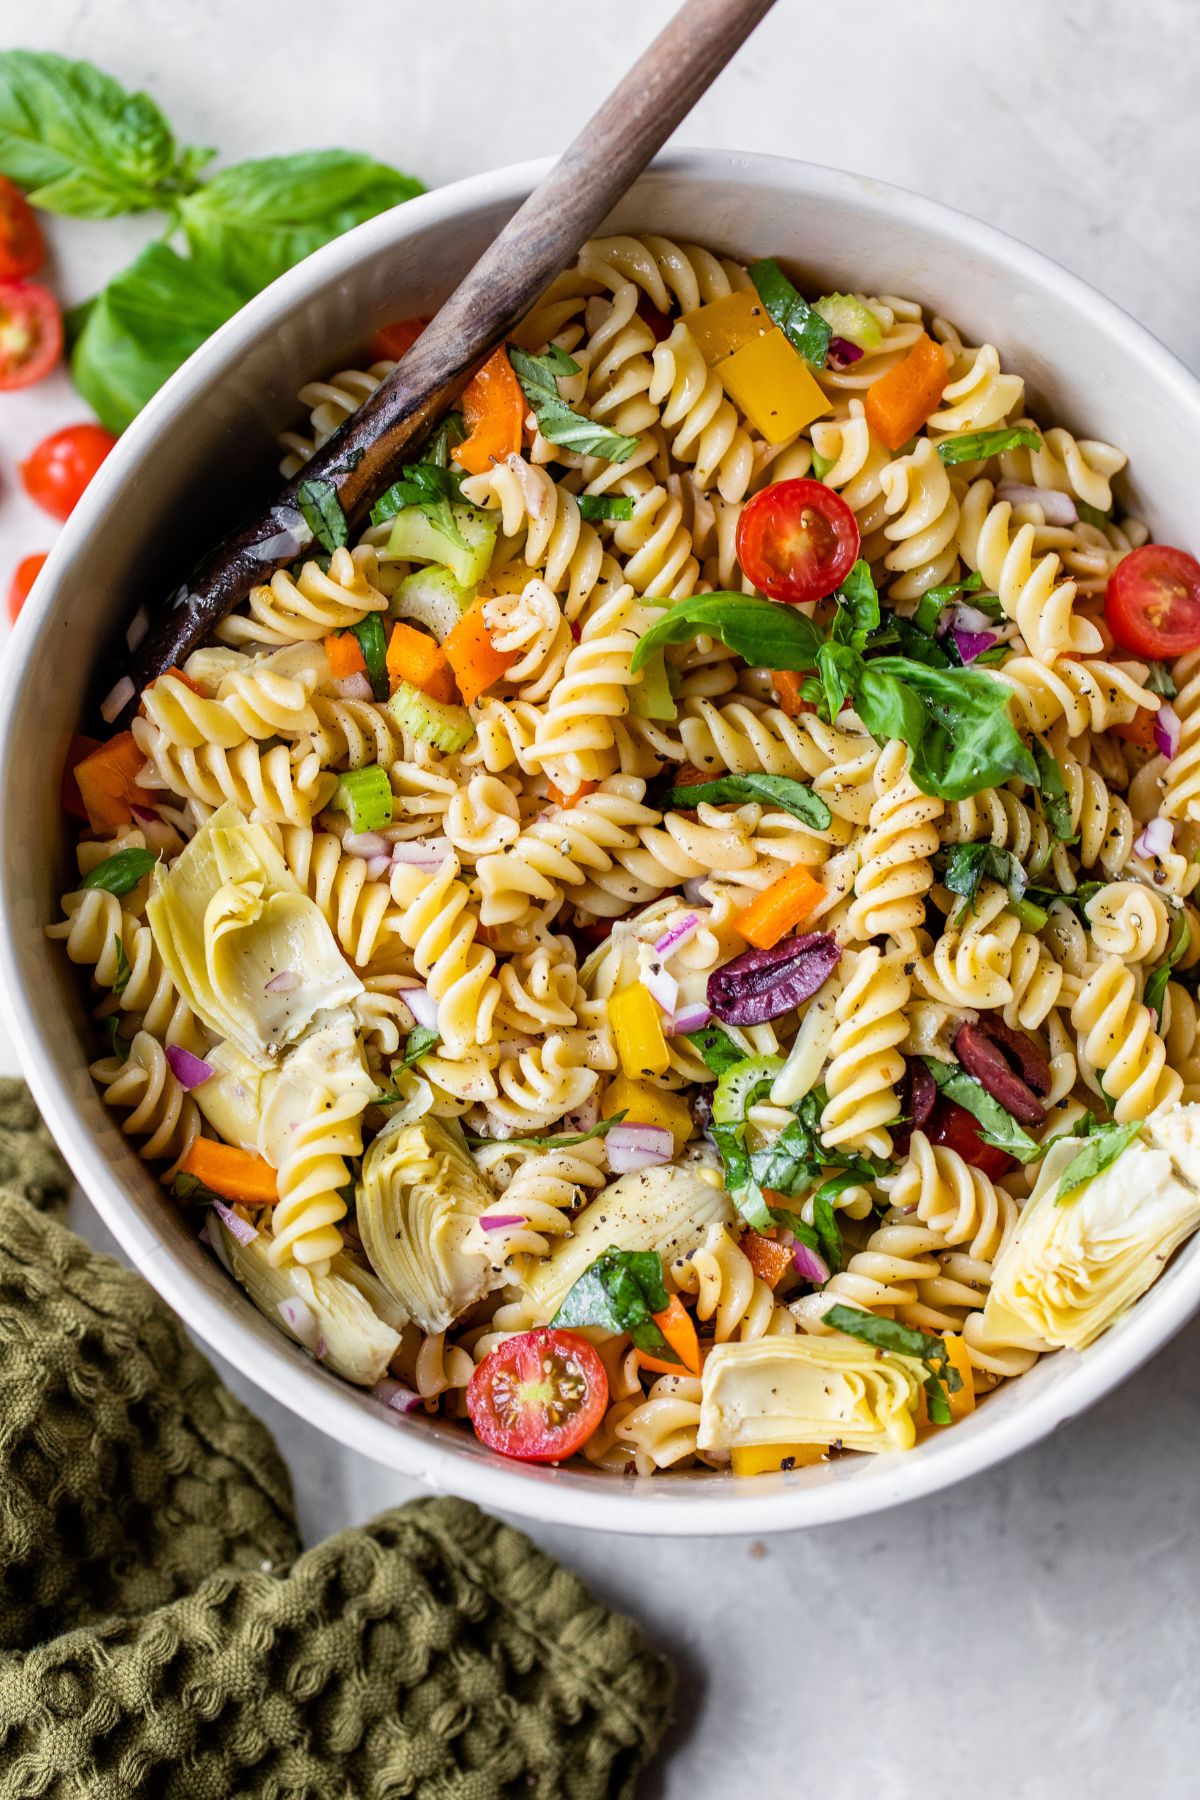 Italian pasta salad in a large white serving bowl.